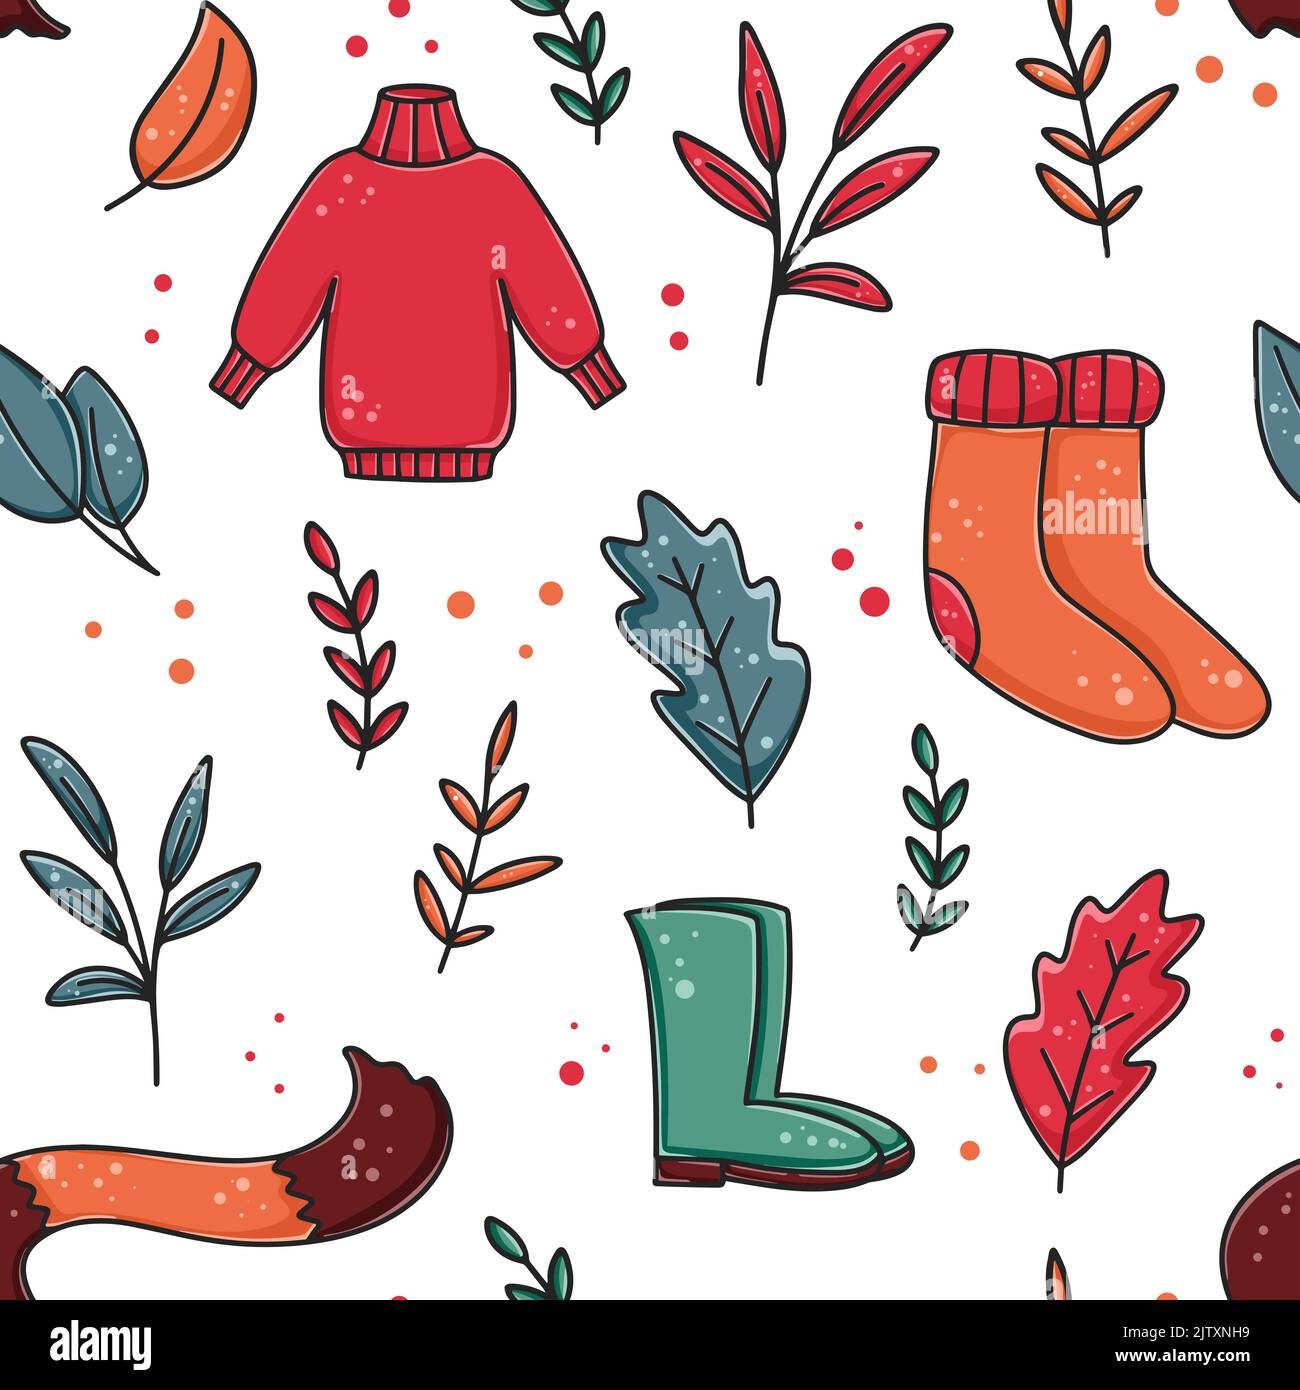 Warm knitted clothes and shoes seamless autumn pattern. Background with sweater, scarf, socks and boots. Fall print with foliage and wardrobe items Stock Vector